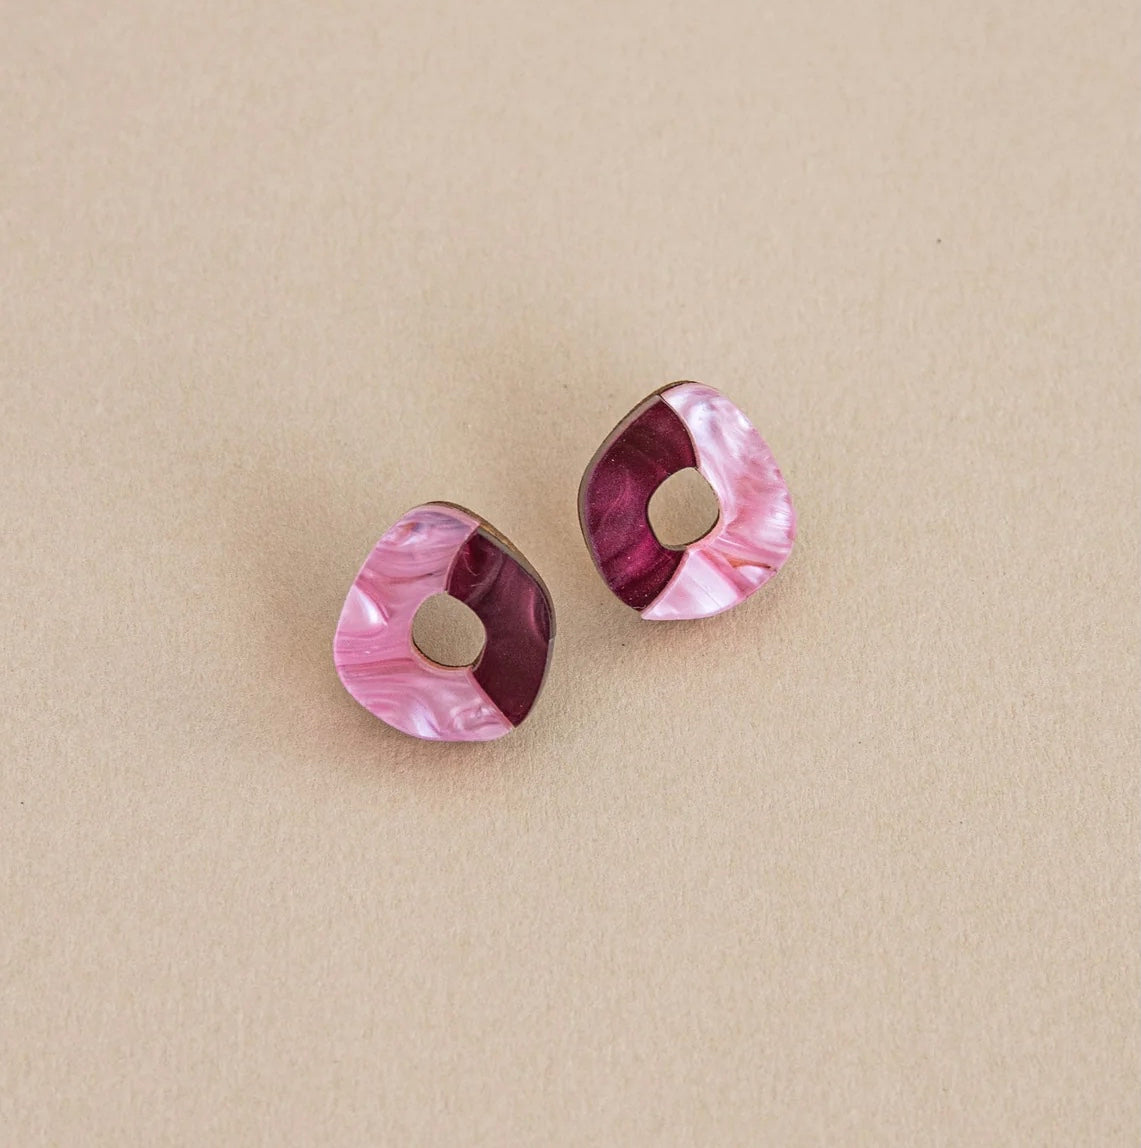 'Oh' Stud Earrings in Berry & Pink - The Bristol Artisan Handmade Sustainable Gifts and Homewares.